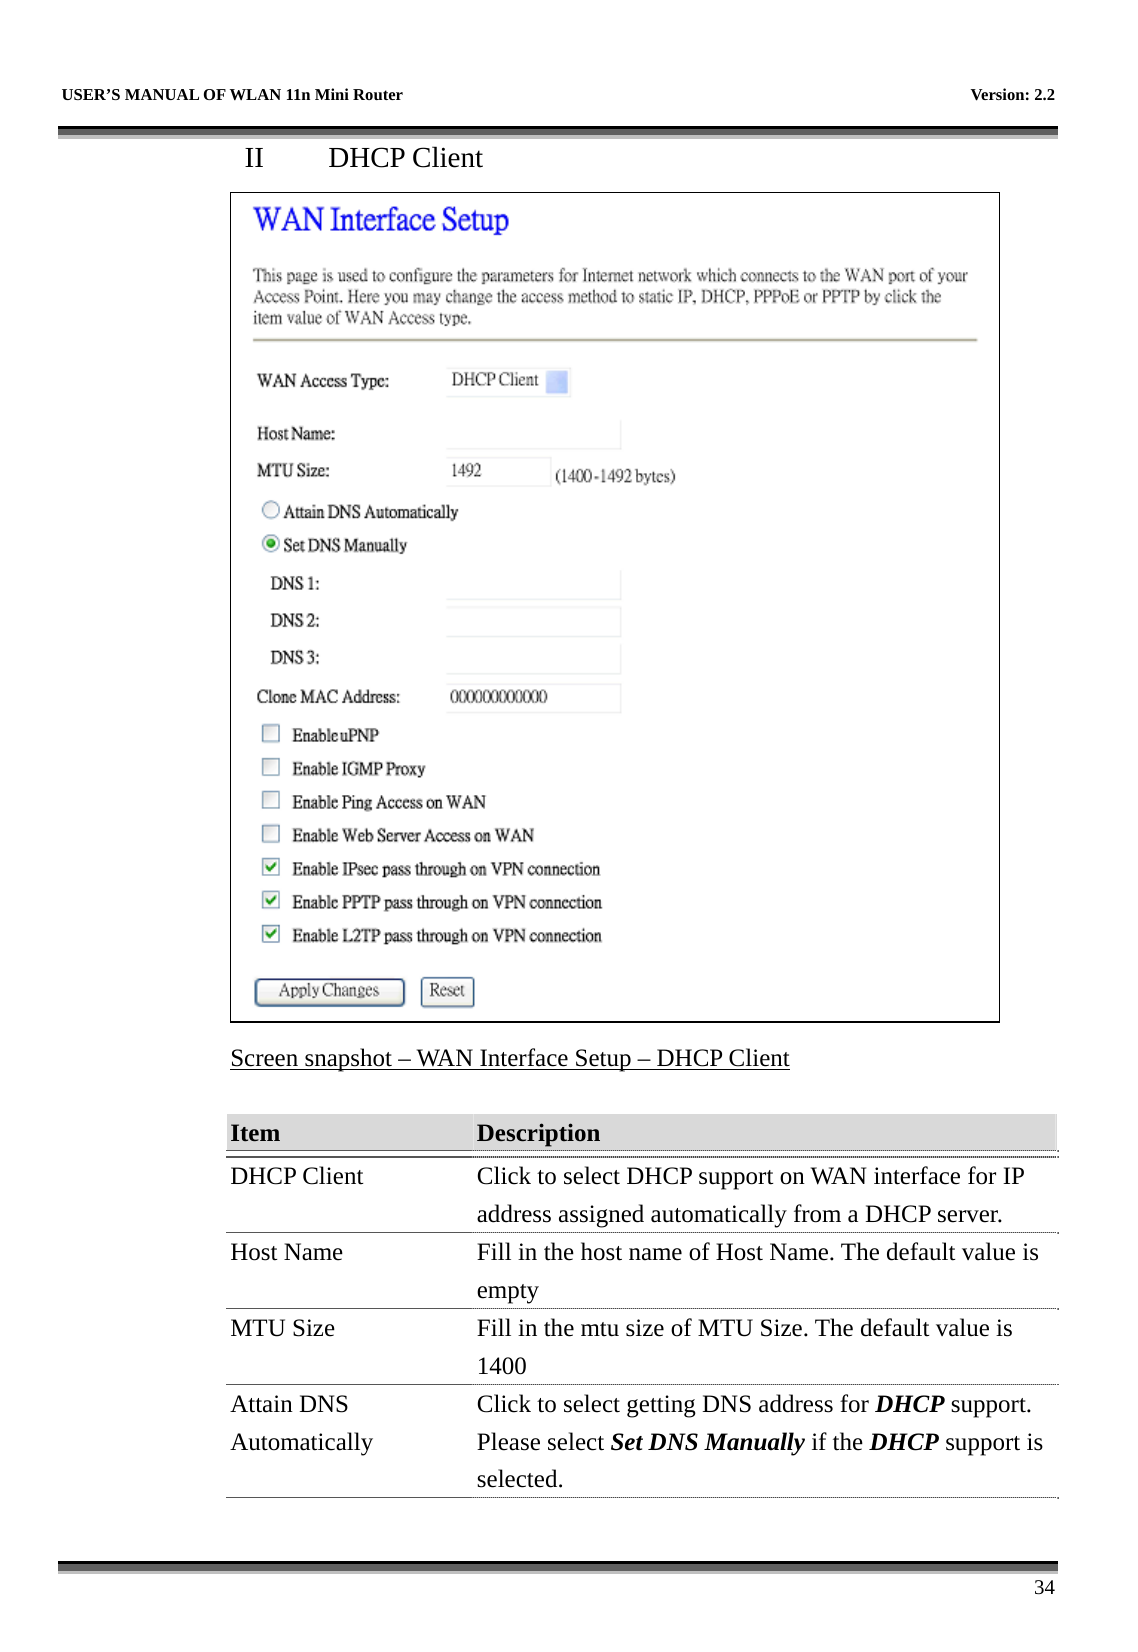   USER’S MANUAL OF WLAN 11n Mini Router    Version: 2.2      34 II  DHCP Client  Screen snapshot – WAN Interface Setup – DHCP Client  Item  Description   DHCP Client  Click to select DHCP support on WAN interface for IP address assigned automatically from a DHCP server. Host Name  Fill in the host name of Host Name. The default value is empty MTU Size  Fill in the mtu size of MTU Size. The default value is 1400 Attain DNS Automatically Click to select getting DNS address for DHCP support. Please select Set DNS Manually if the DHCP support is selected. 